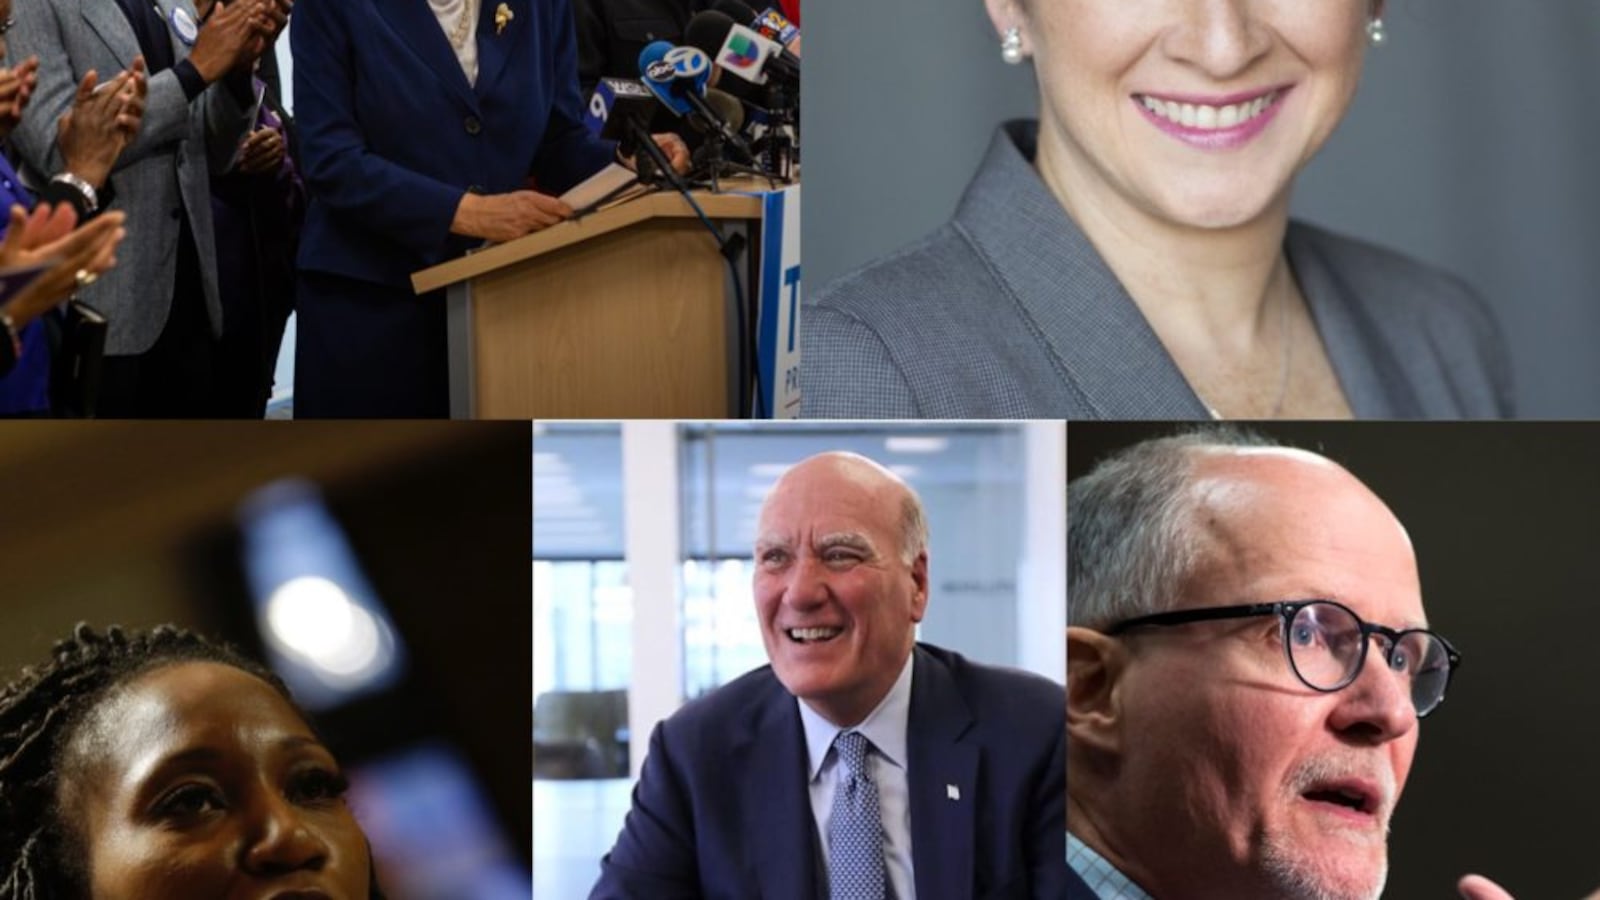 Clockwise from top left, candidates for Chicago mayor Toni Preckwinkle, Susana Mendoza, Paul Vallas, Bill Daley and Amara Enyia.